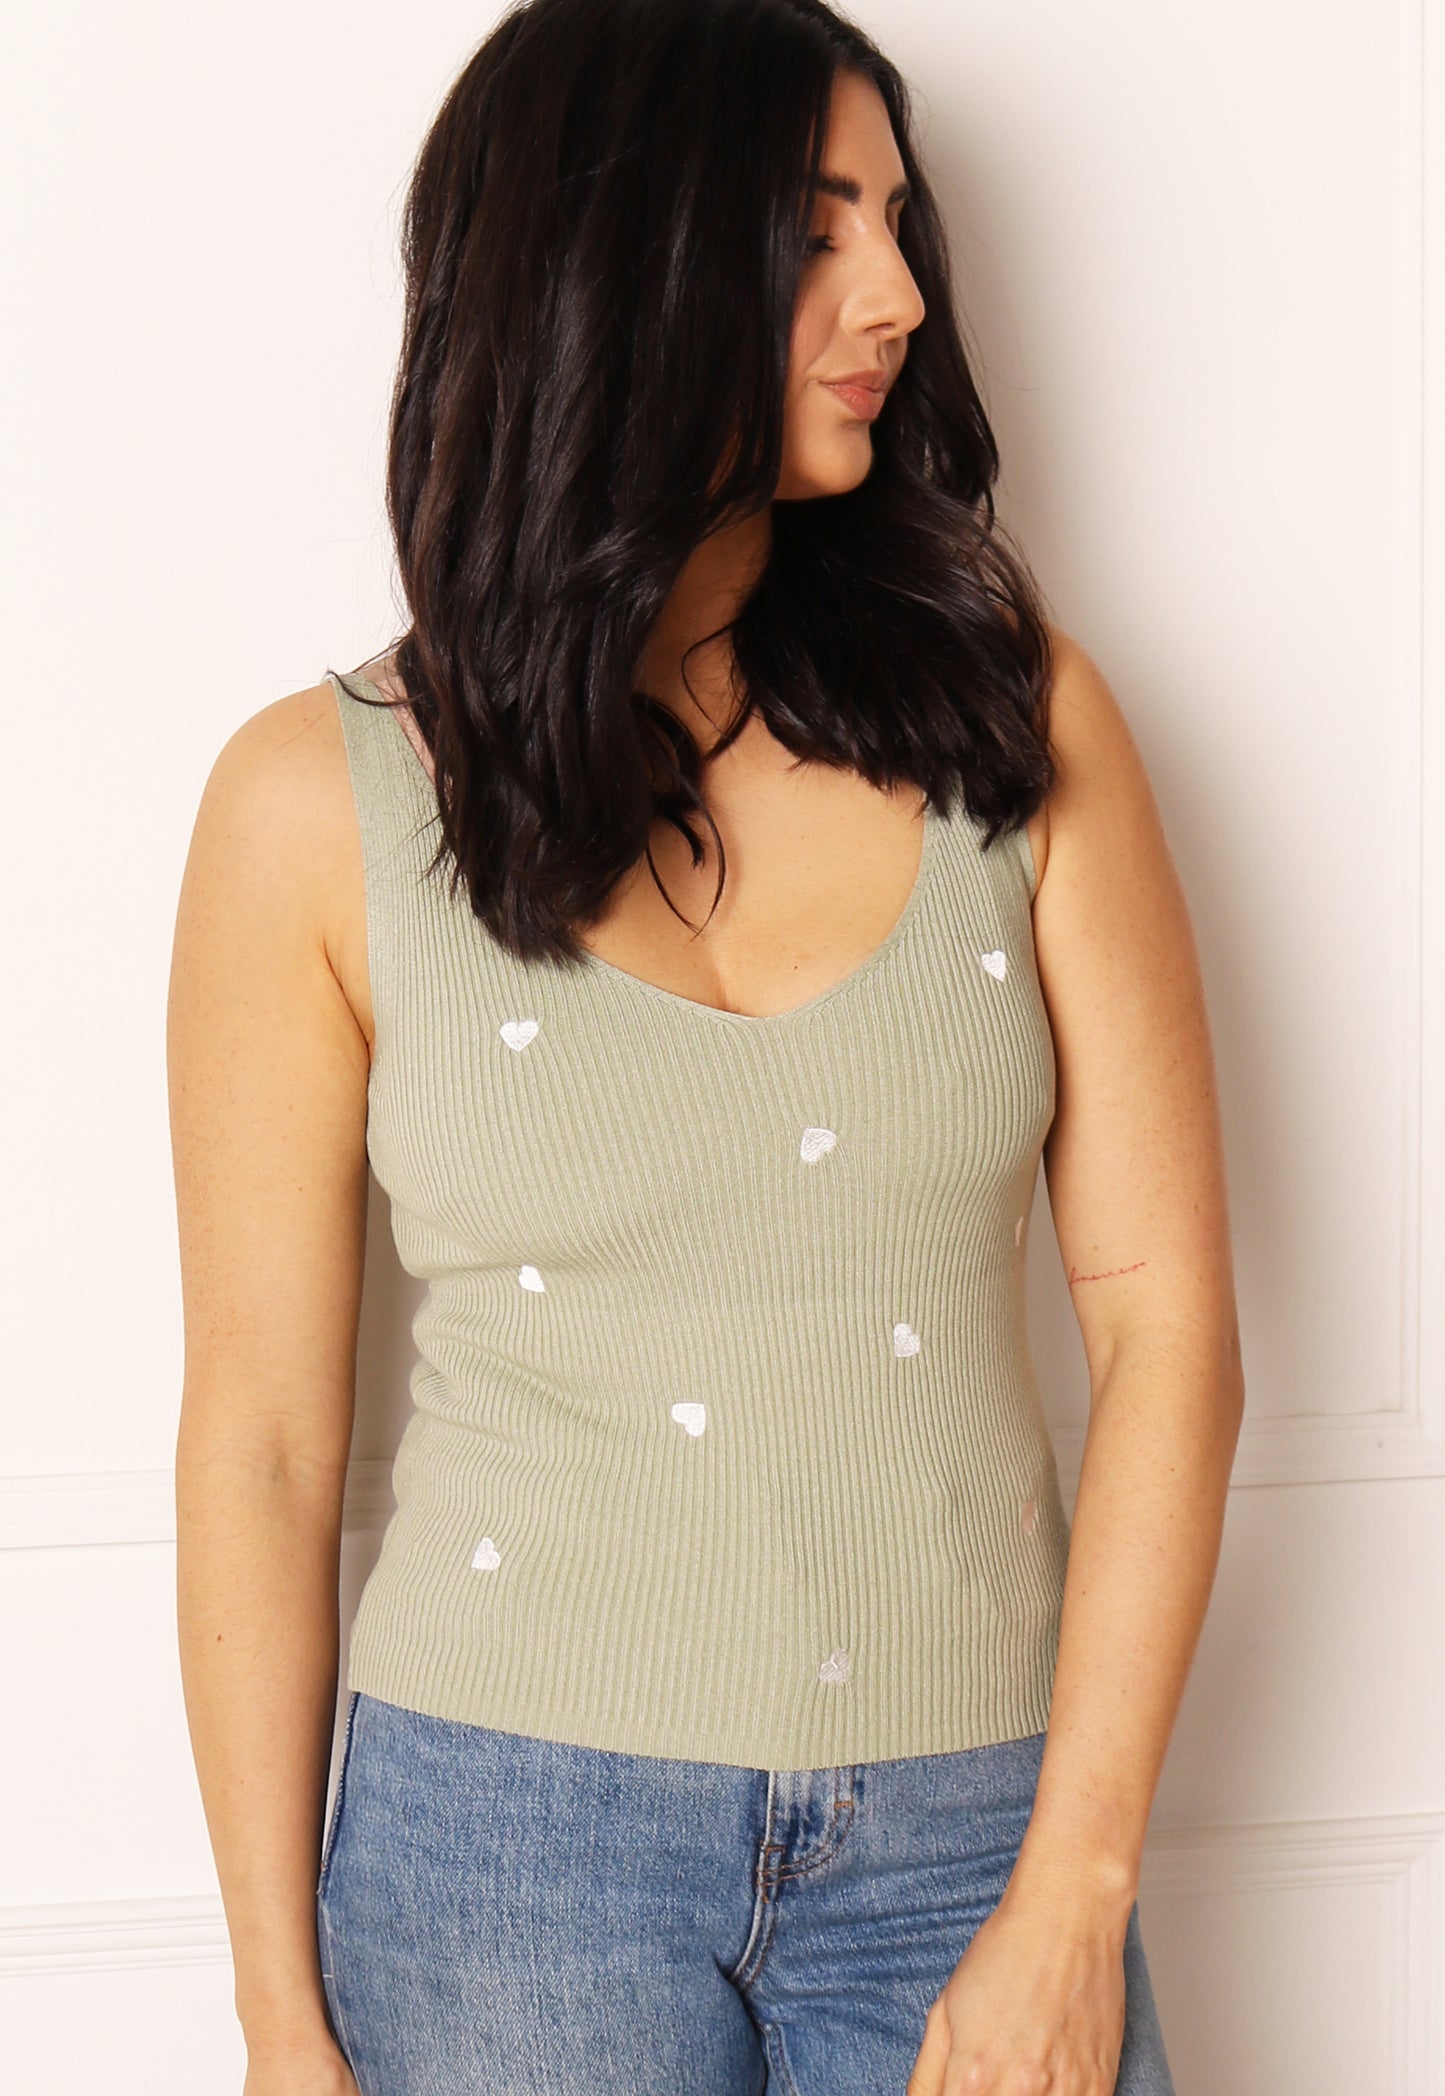 JDY Heart Embroidered Ribbed Knit V Neck Tank Top Vest in Sage Green & White - One Nation Clothing